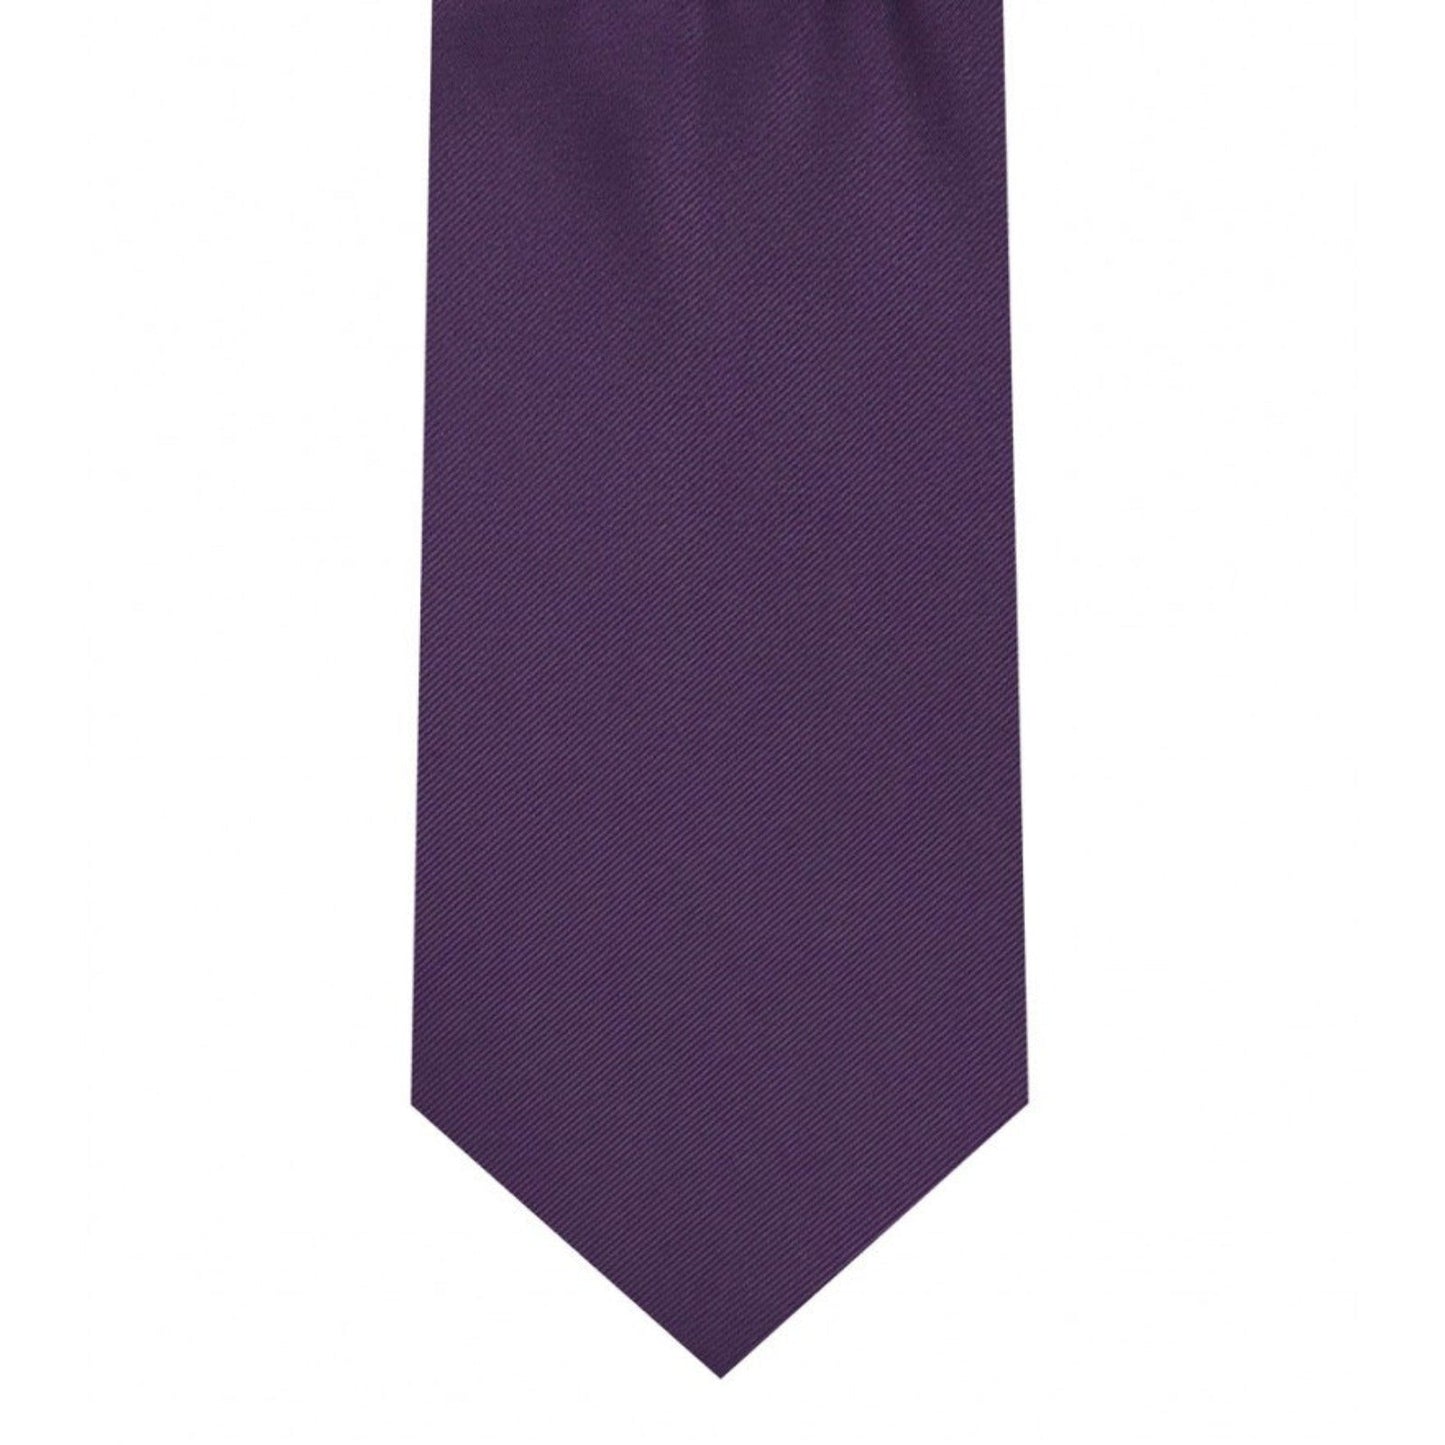 Classic Deep Purple Tie Skinny width 2.75 inches With Matching Pocket Square | KCT Menswear 